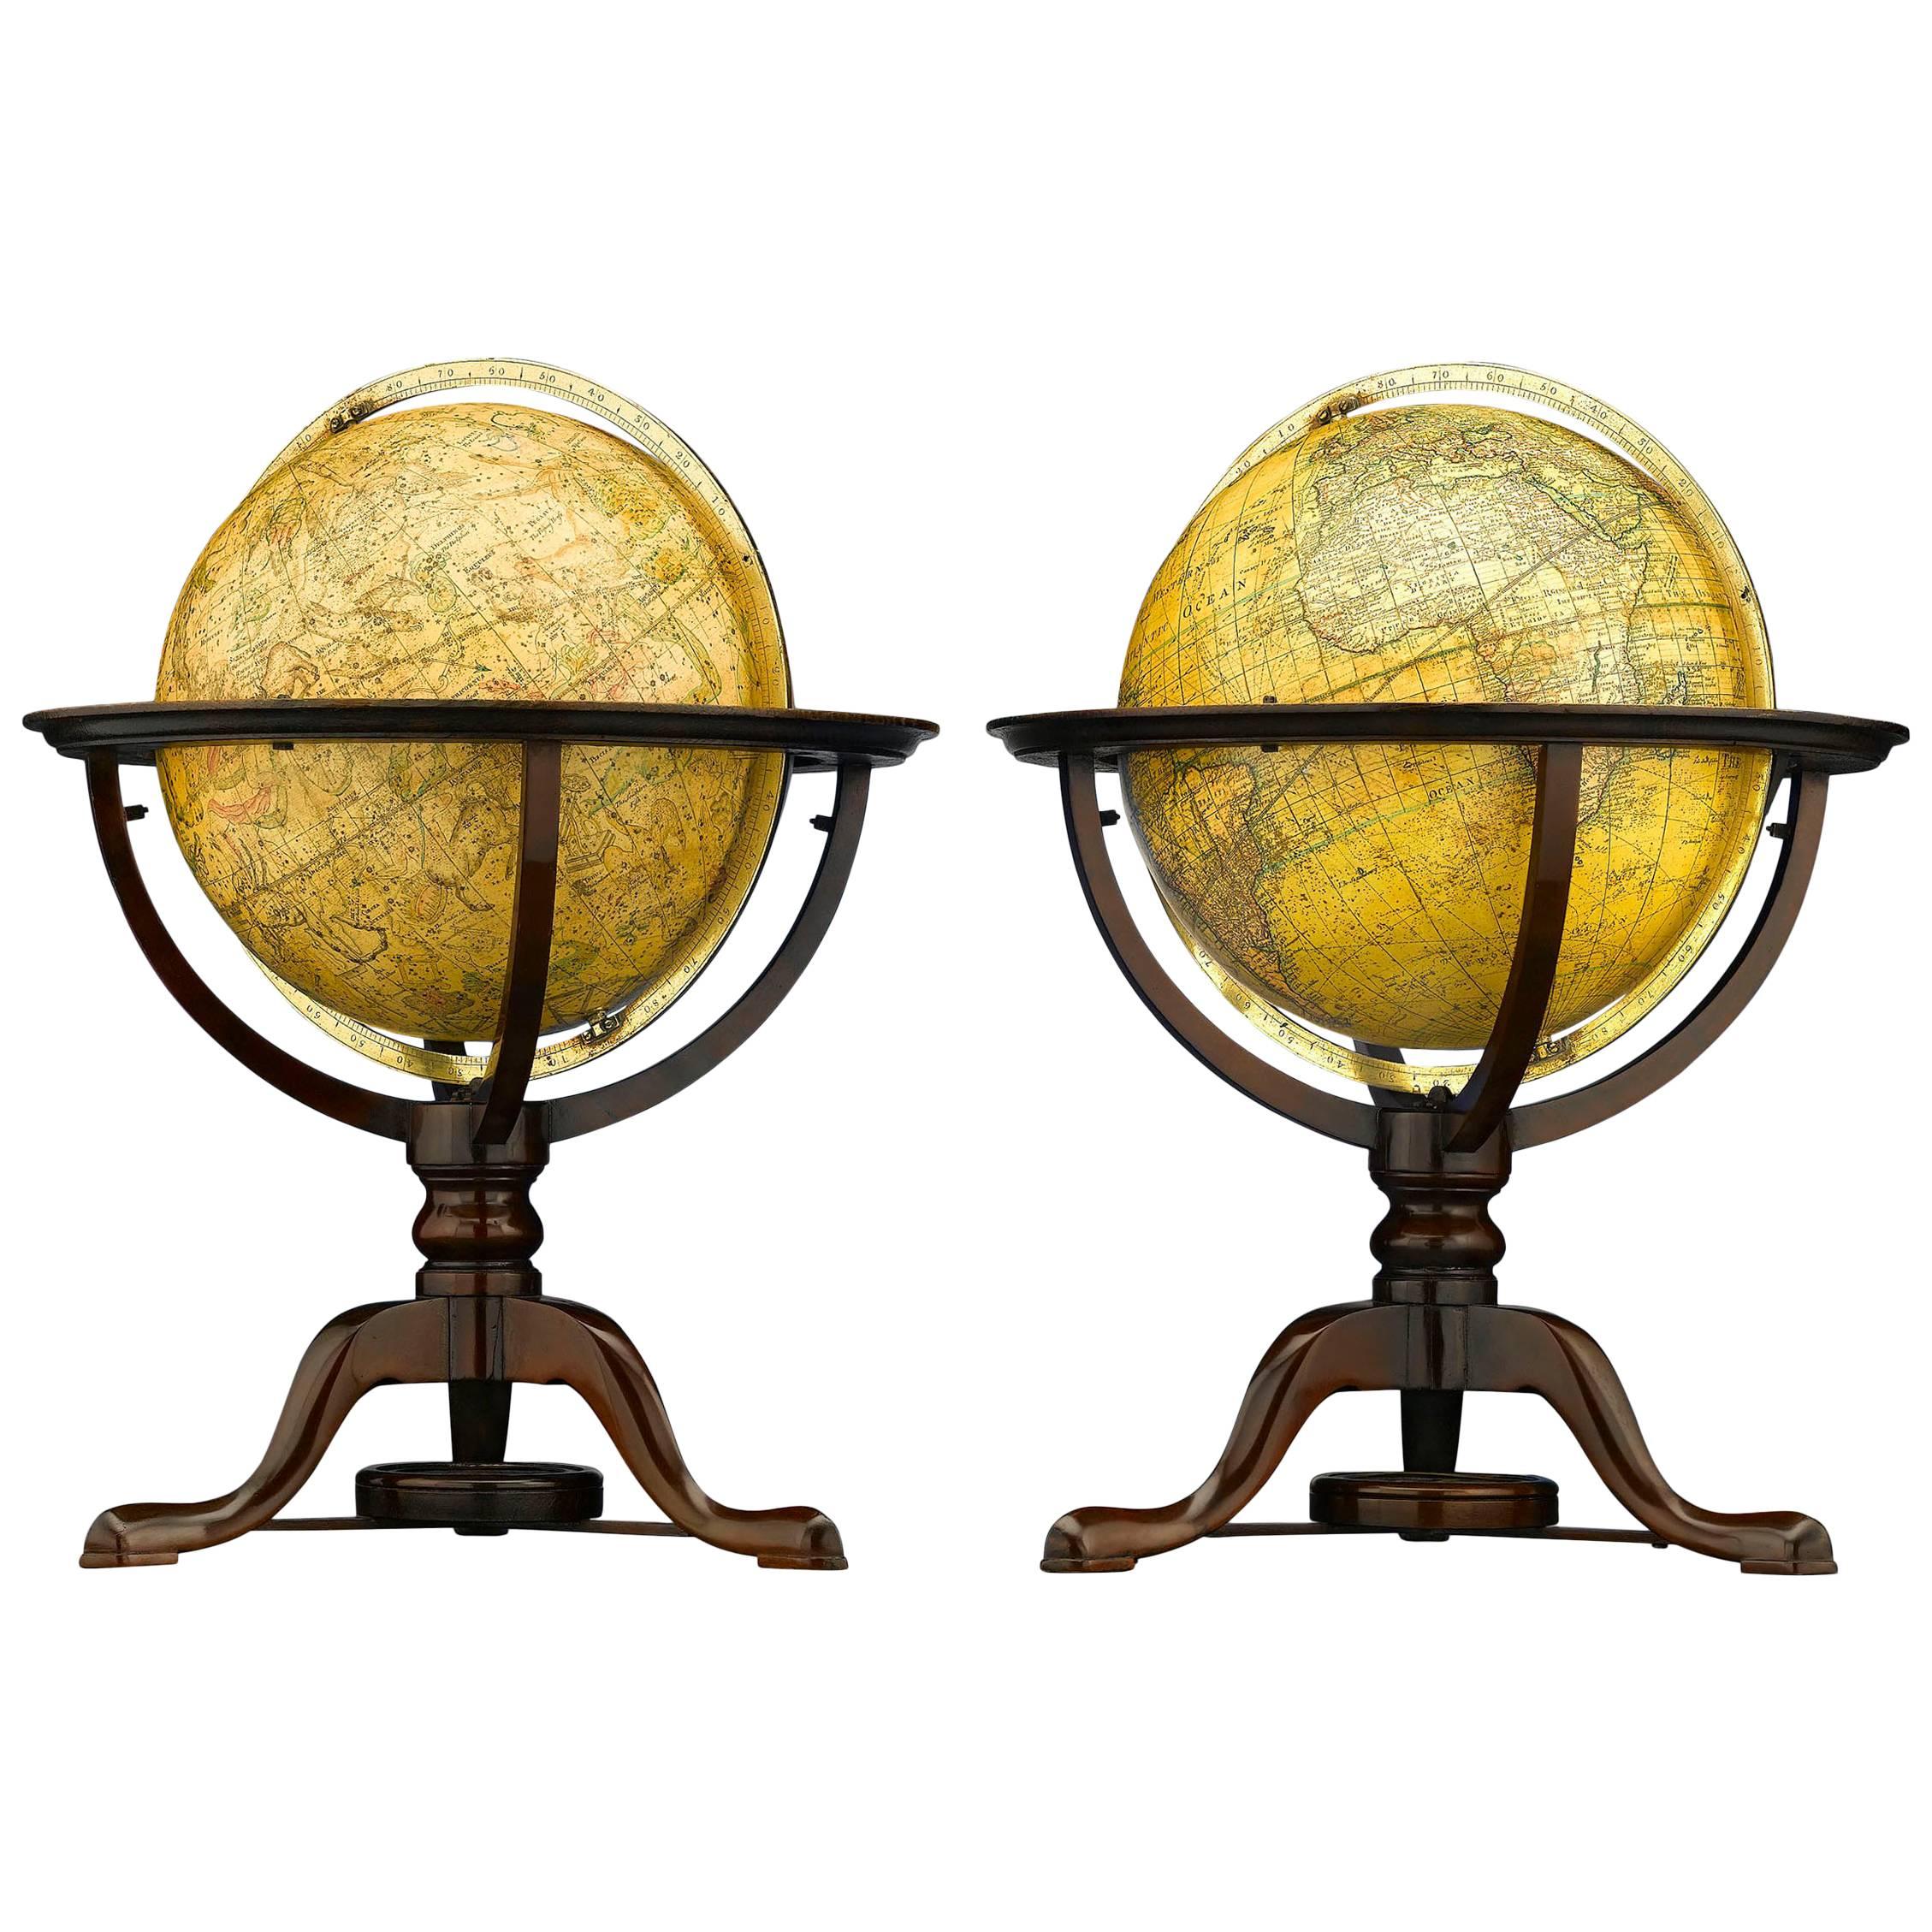 Pair of Globes by Dudley Adams